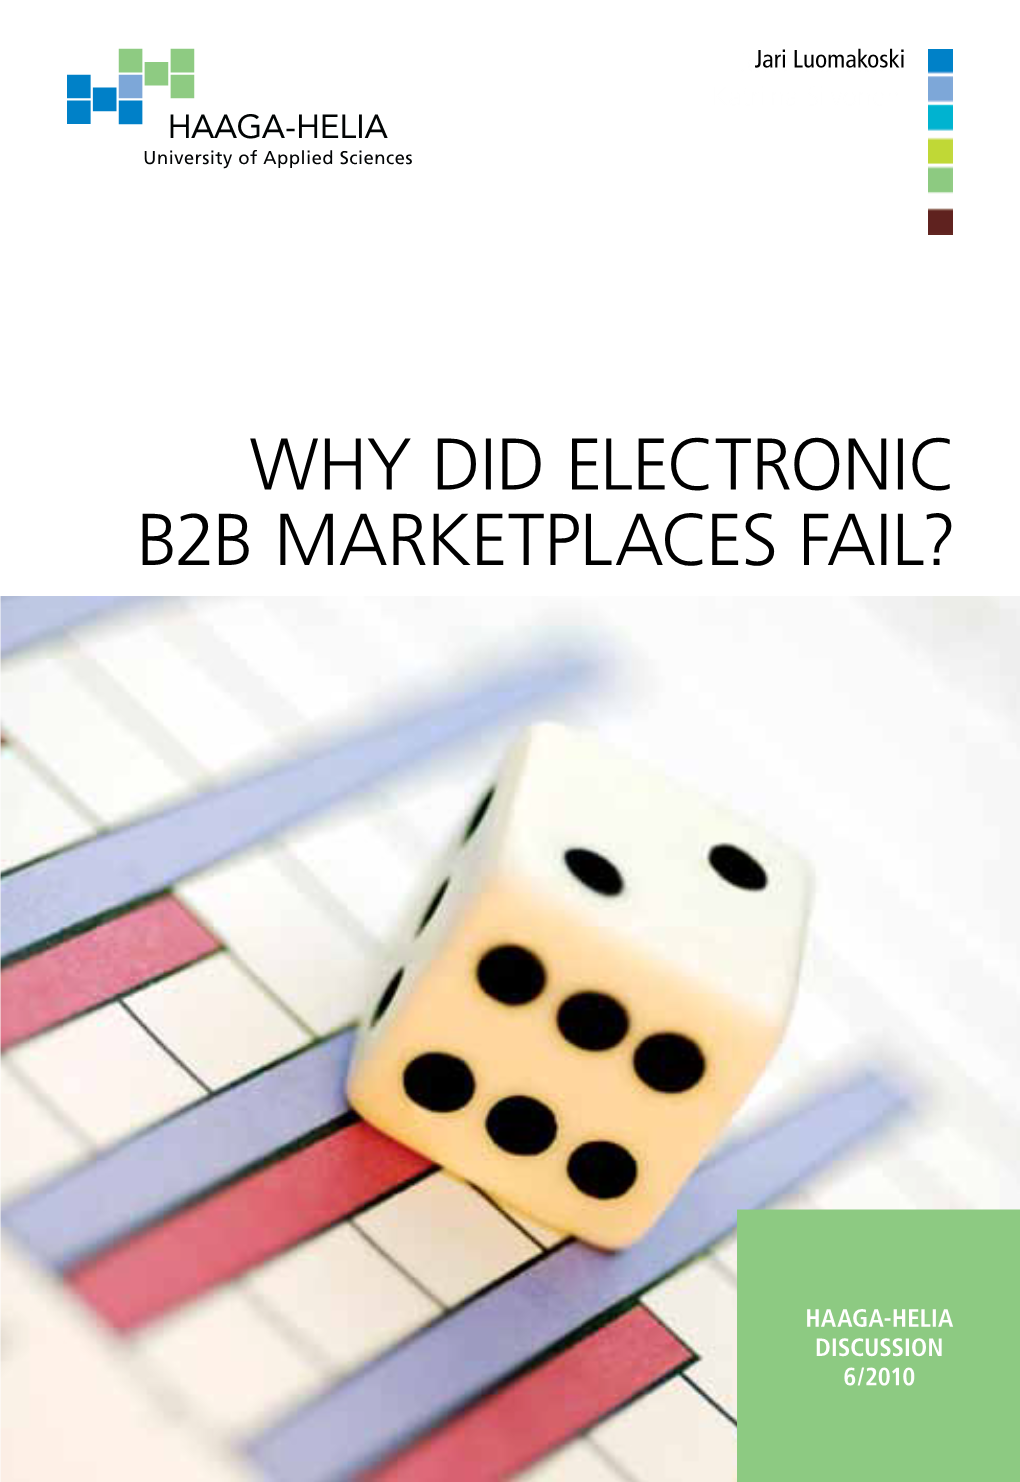 Why Did Electronic B2B Marketplaces Fail?